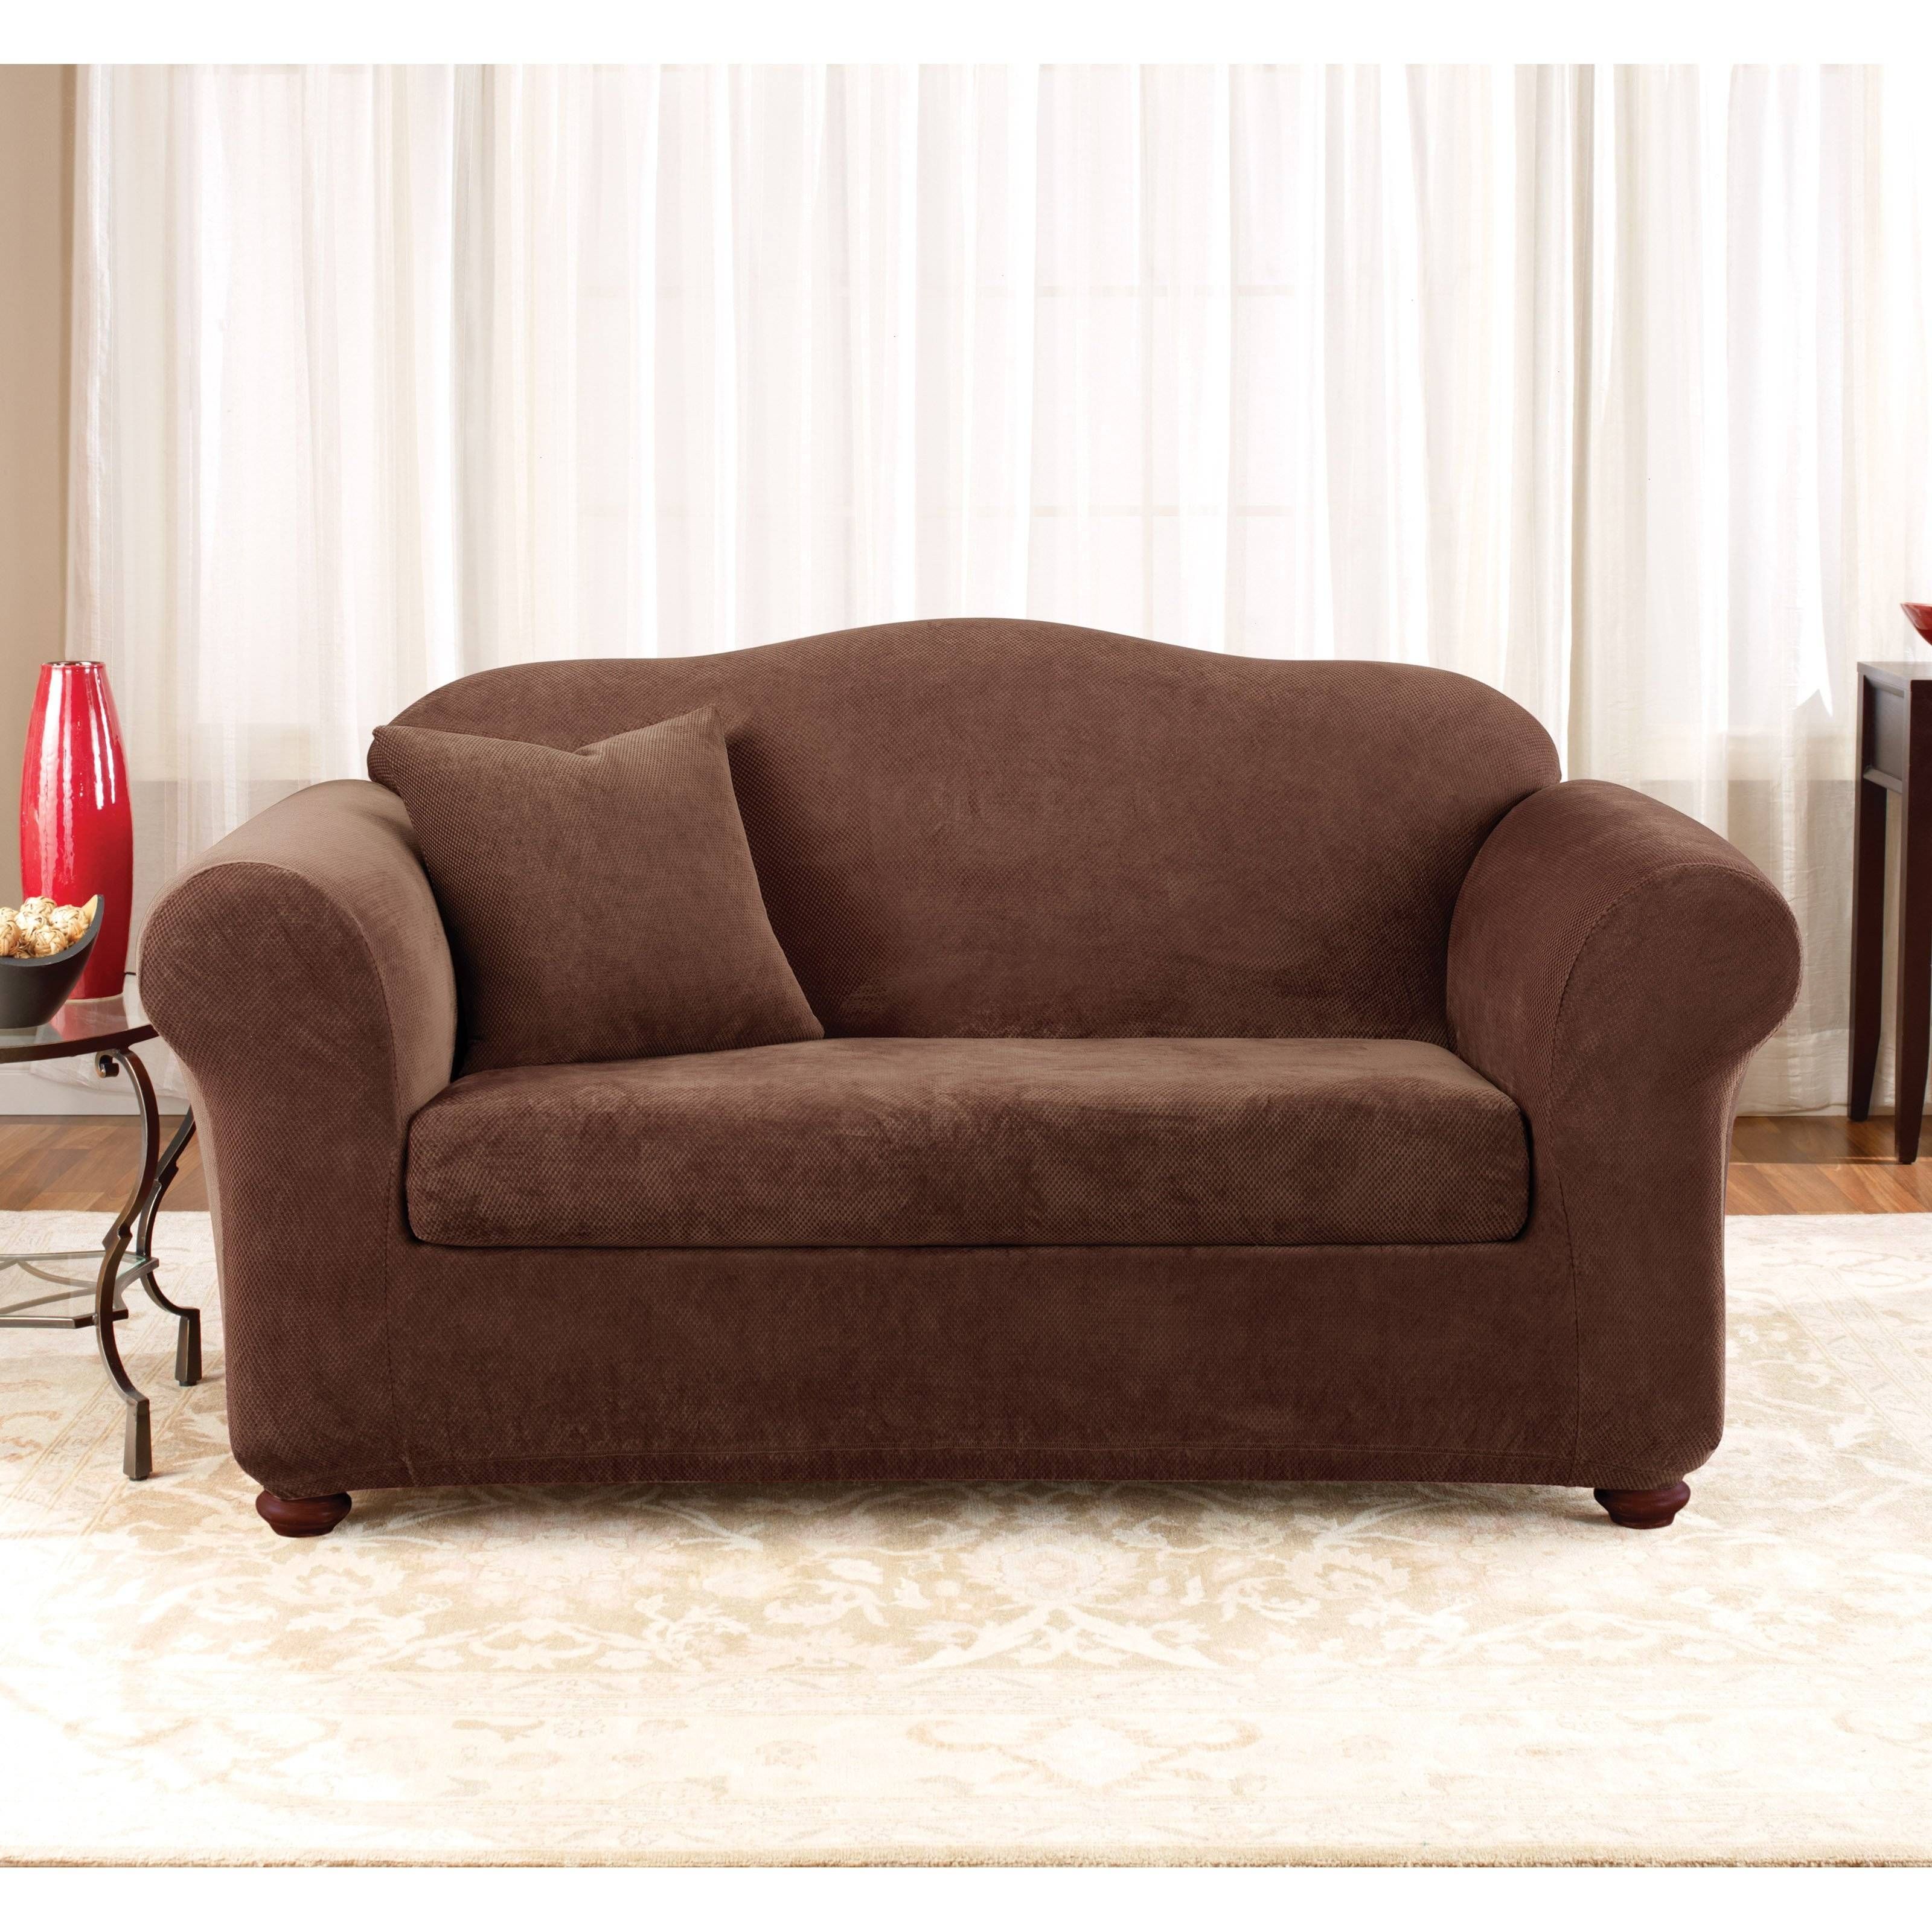 Furniture: Slipcovered Loveseat | Slipcovers For Loveseat With Two With Regard To Navy Blue Slipcovers (View 15 of 15)